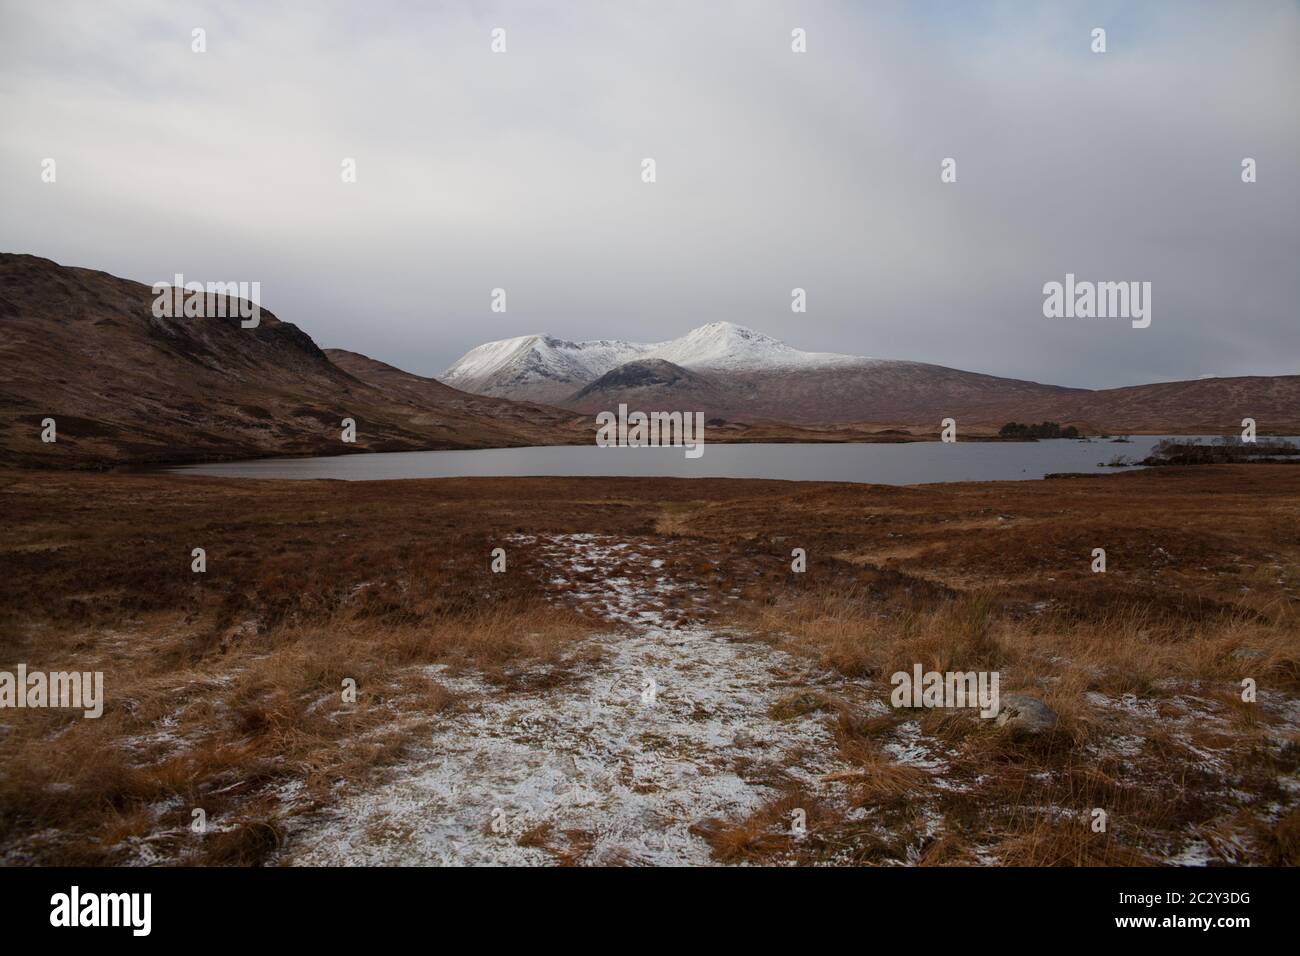 Snow capped mountains in the distance with a loch, Glencoe Scotland Stock Photo